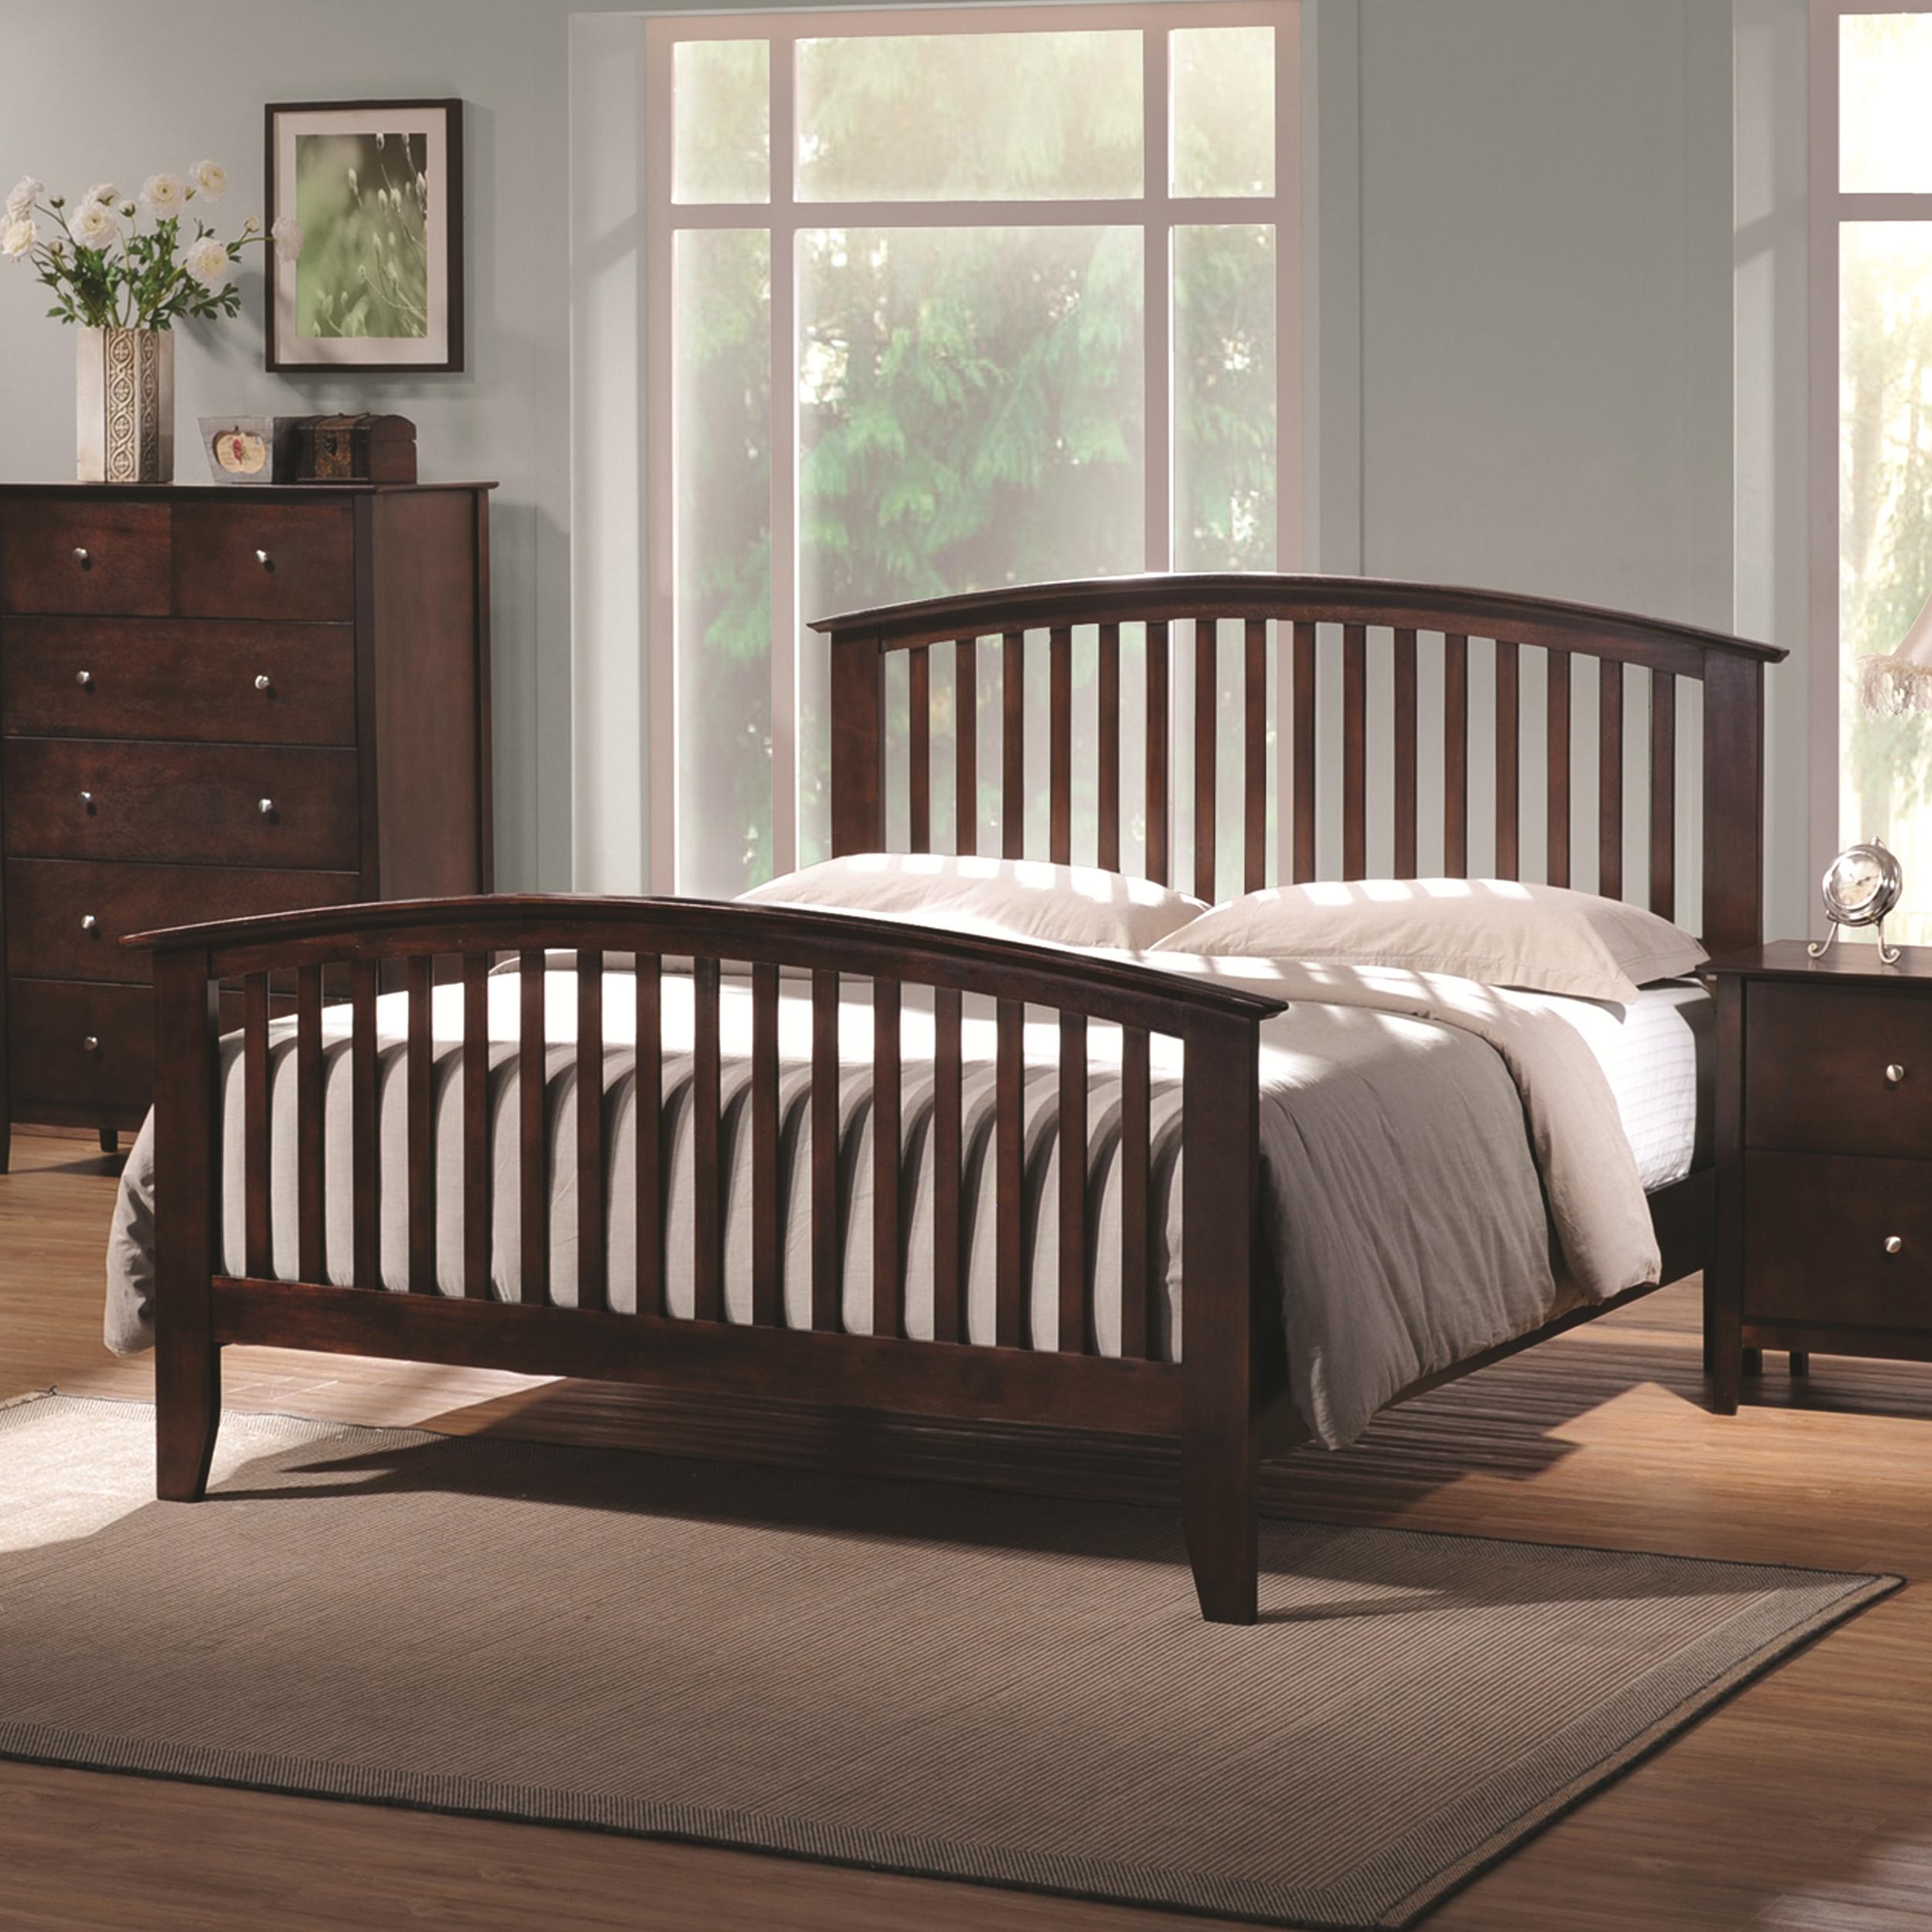 Coaster 202081q Tia Cappuccino Slatted, King Size Bed Frame With Headboard And Footboard